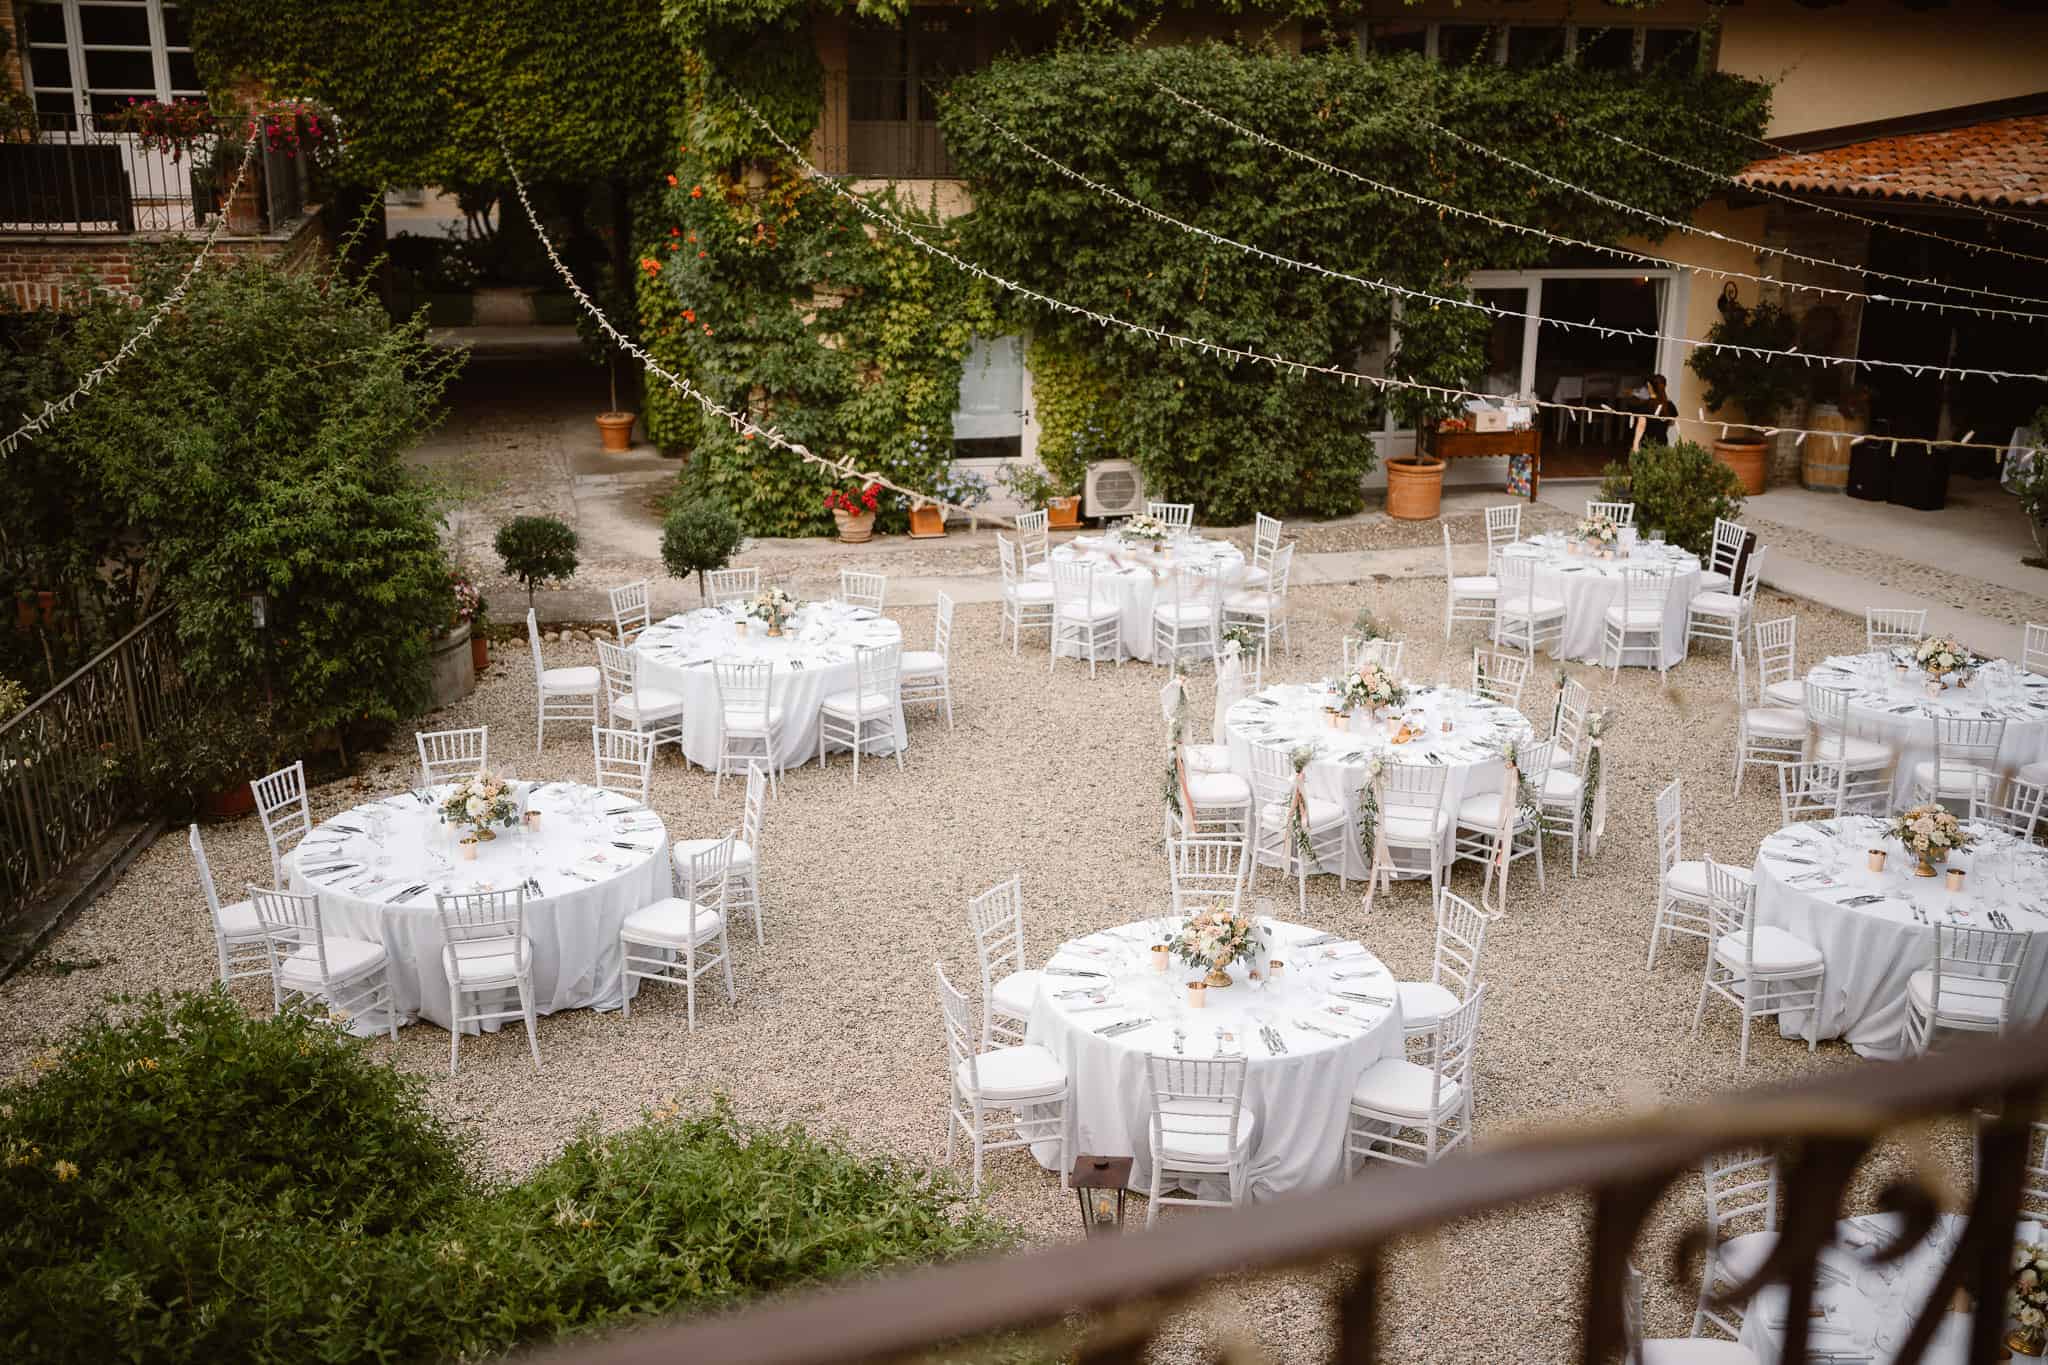 Round white tables for a dinner wedding dinner in Italy.